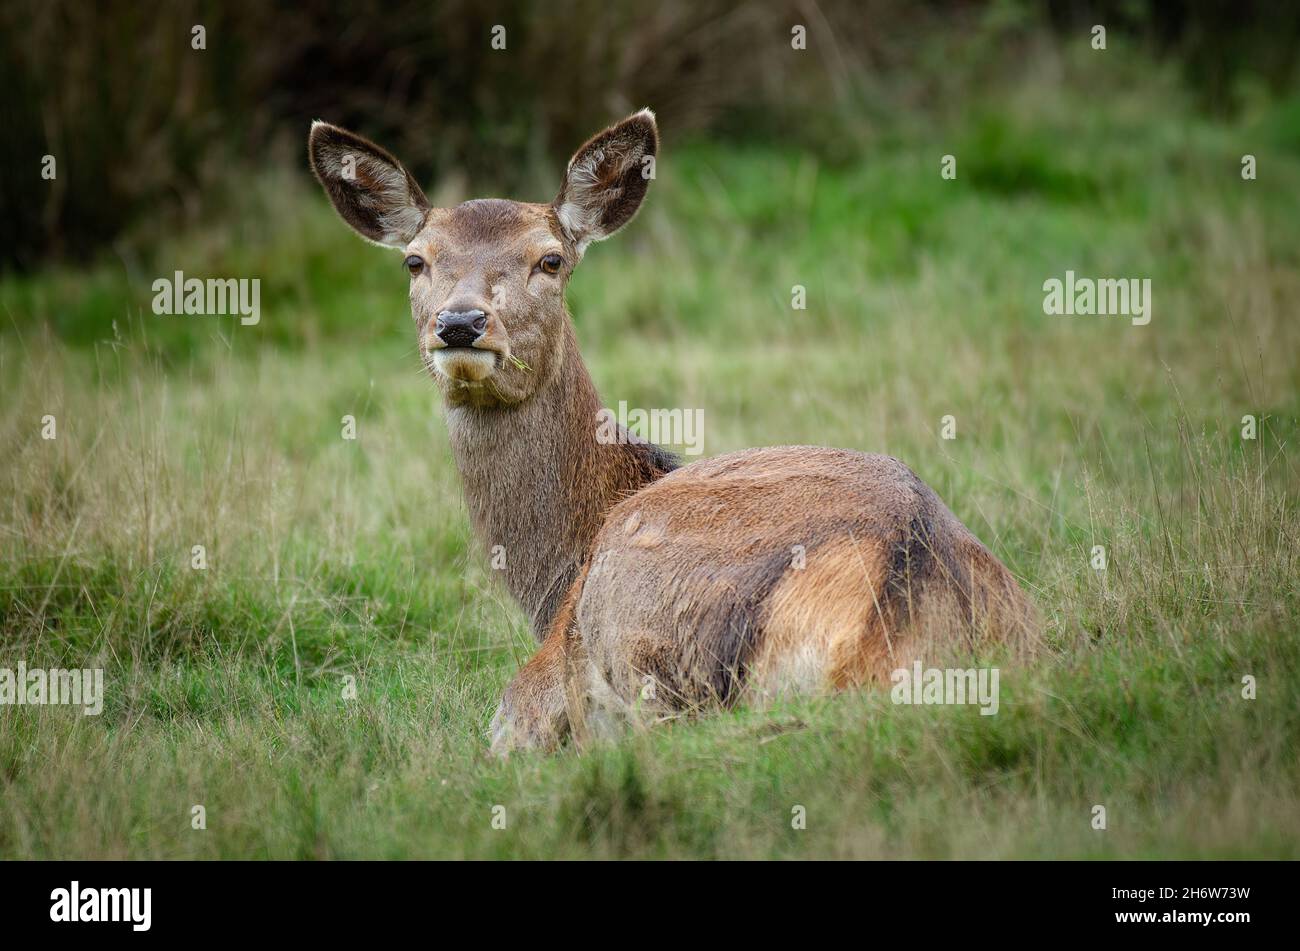 A red deer doe with grass in her mouth lying on the grass looking back at the camera Stock Photo